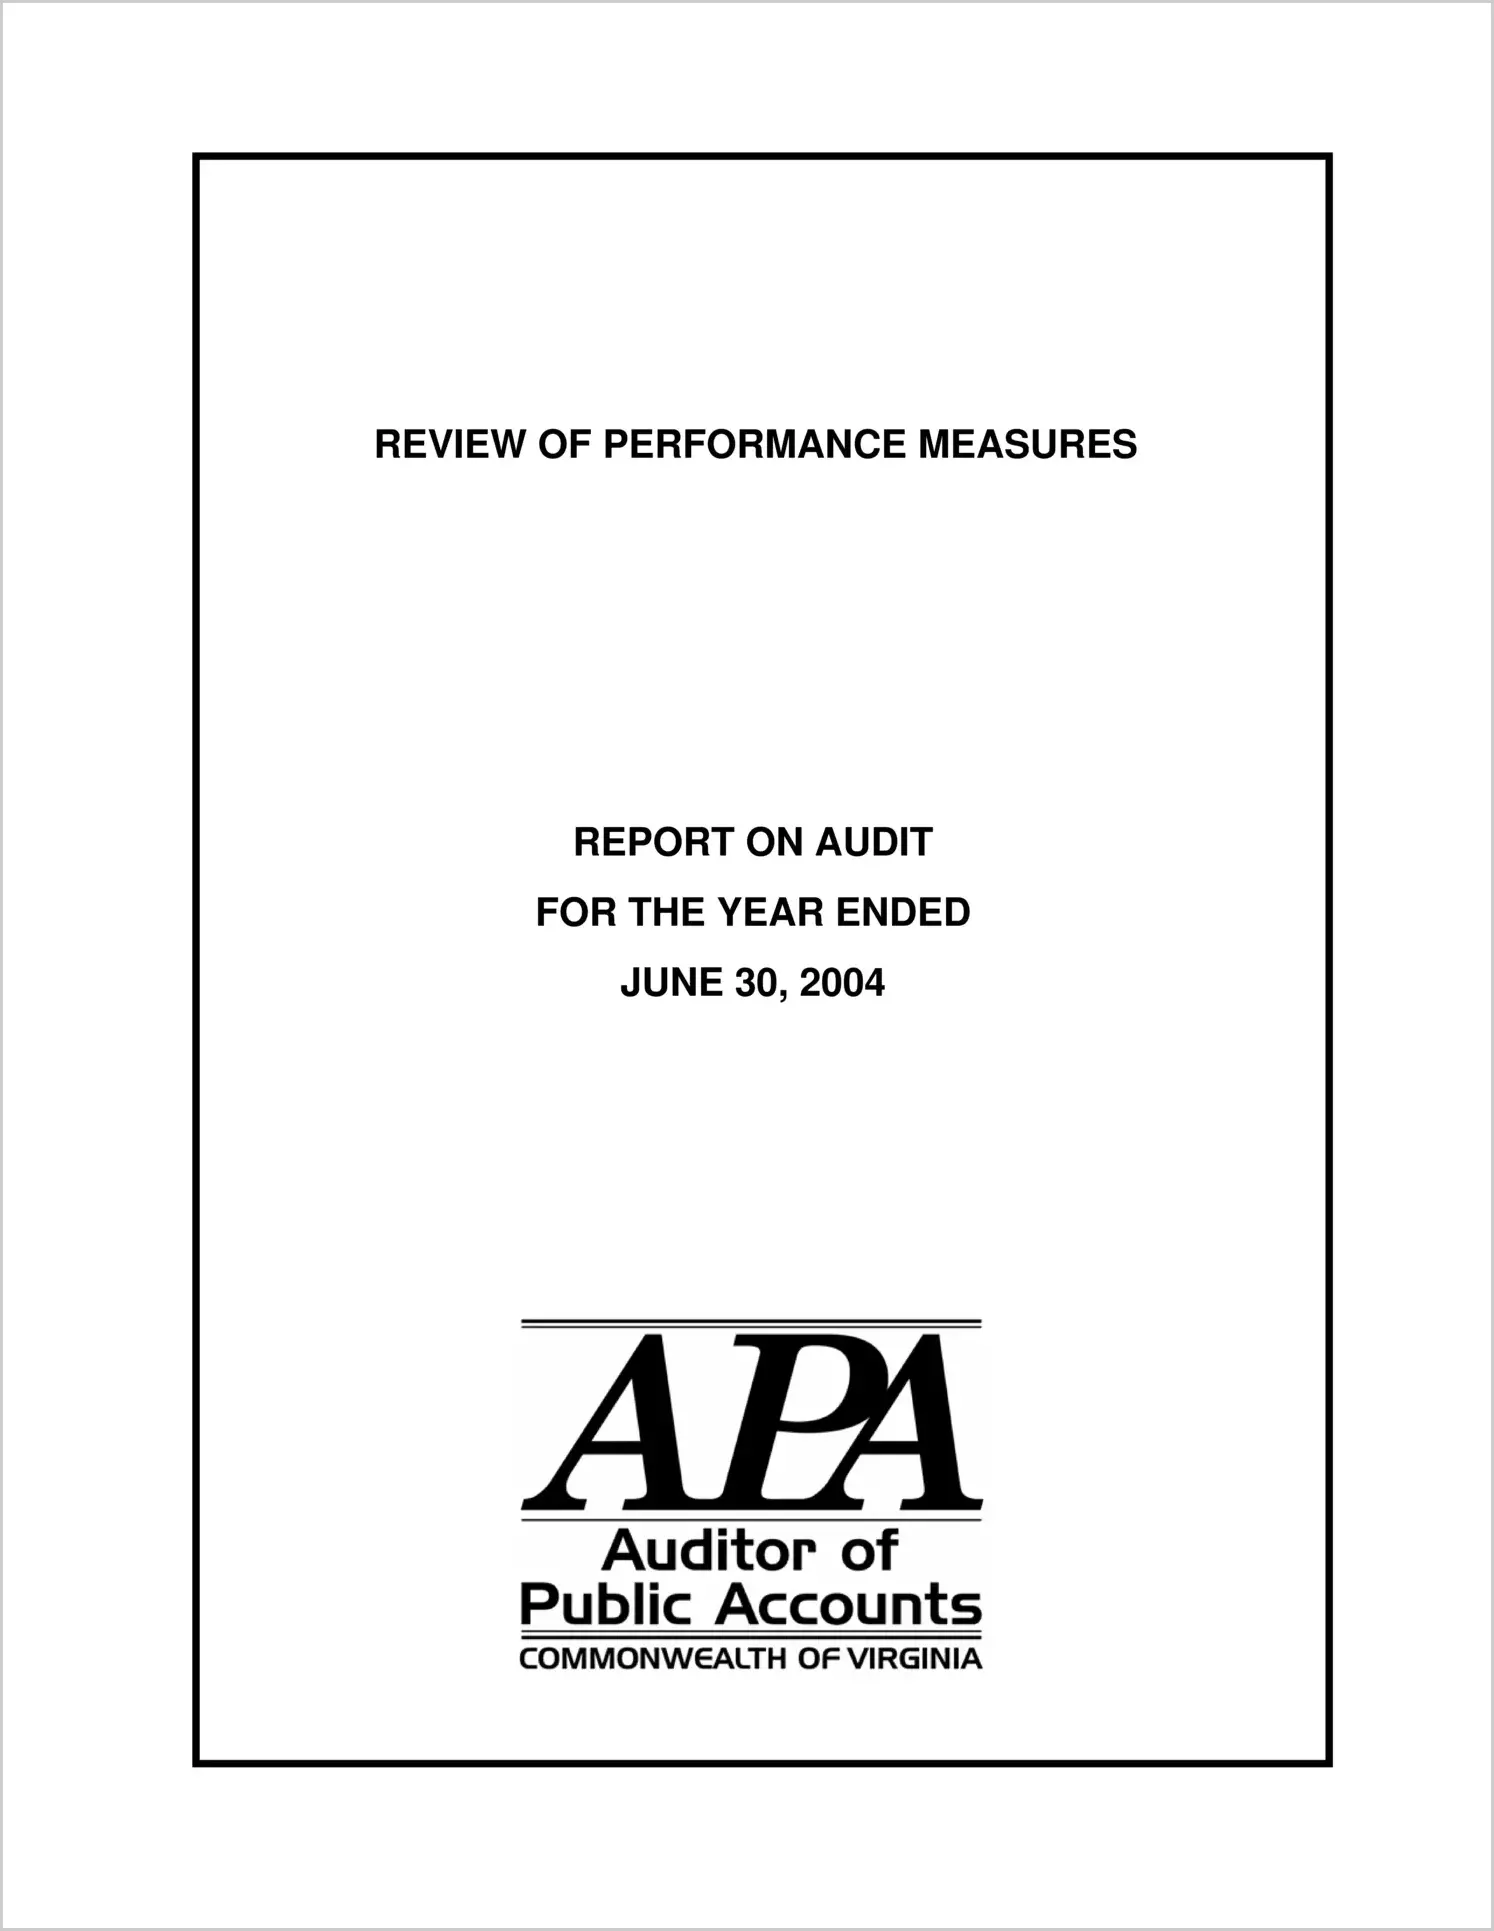 Review of Performance Measures for the Fiscal Year Ended June 30, 2004